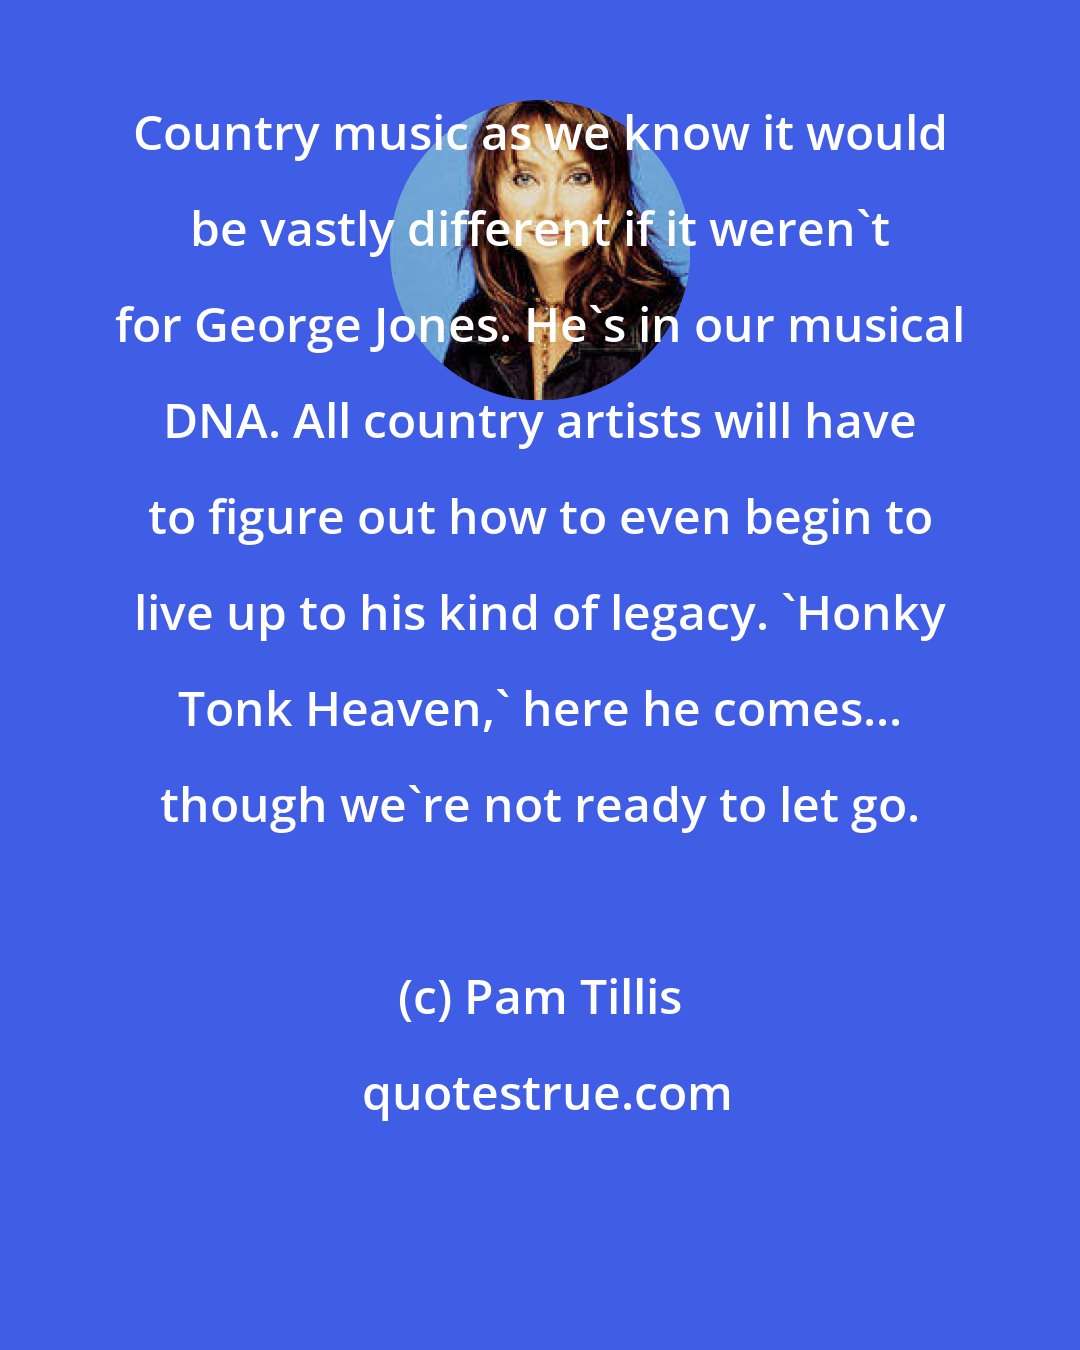 Pam Tillis: Country music as we know it would be vastly different if it weren't for George Jones. He's in our musical DNA. All country artists will have to figure out how to even begin to live up to his kind of legacy. 'Honky Tonk Heaven,' here he comes... though we're not ready to let go.